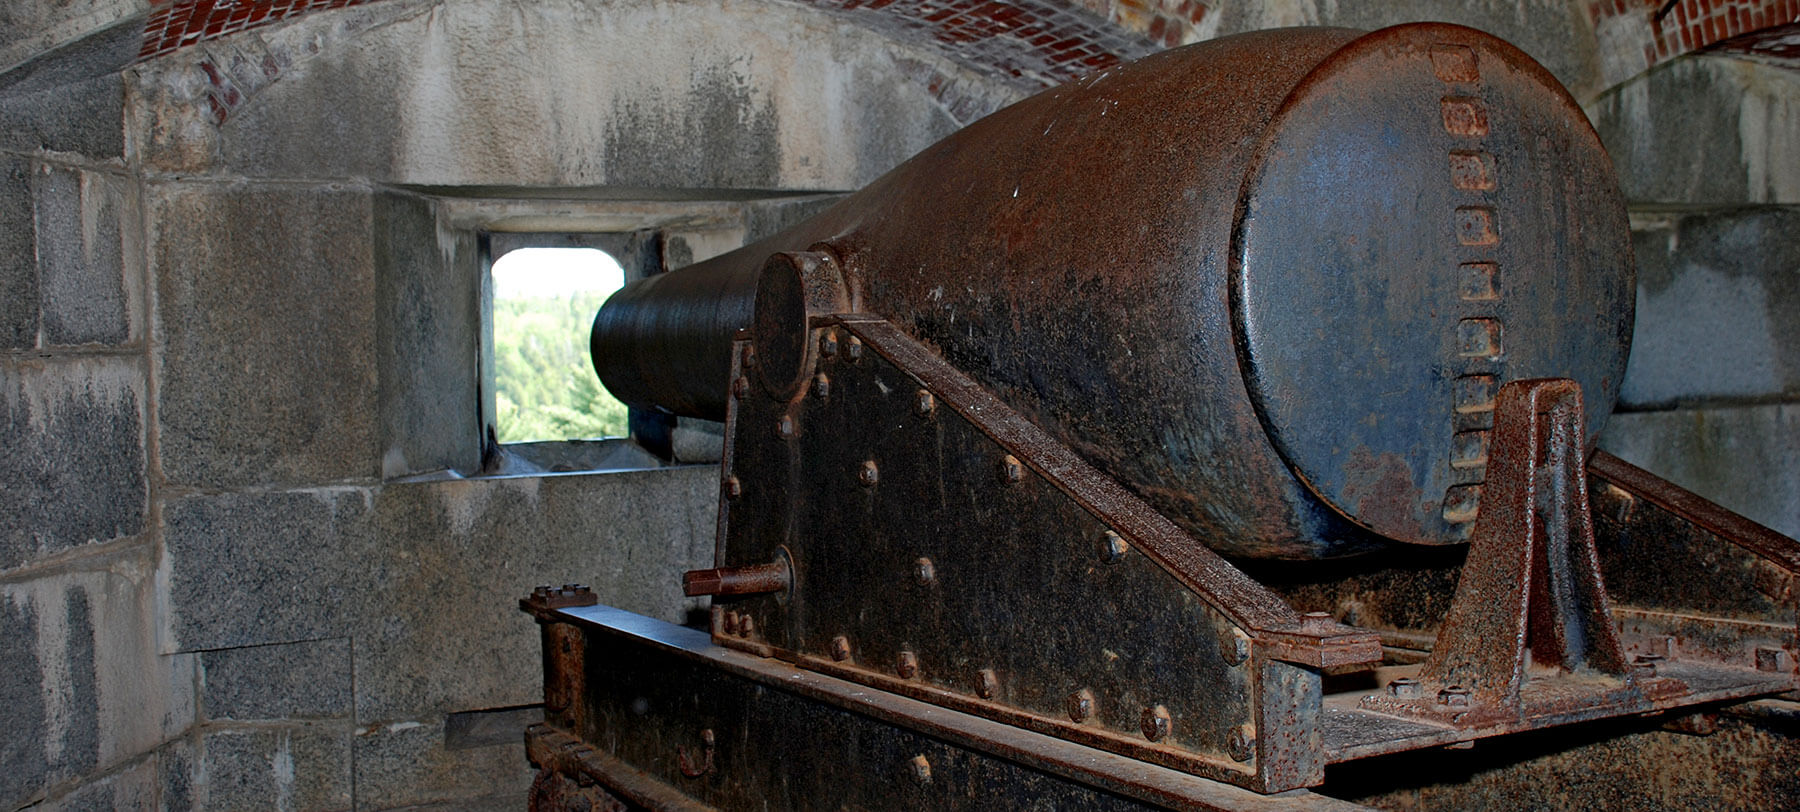 Cannon at Fort Knox, Maine